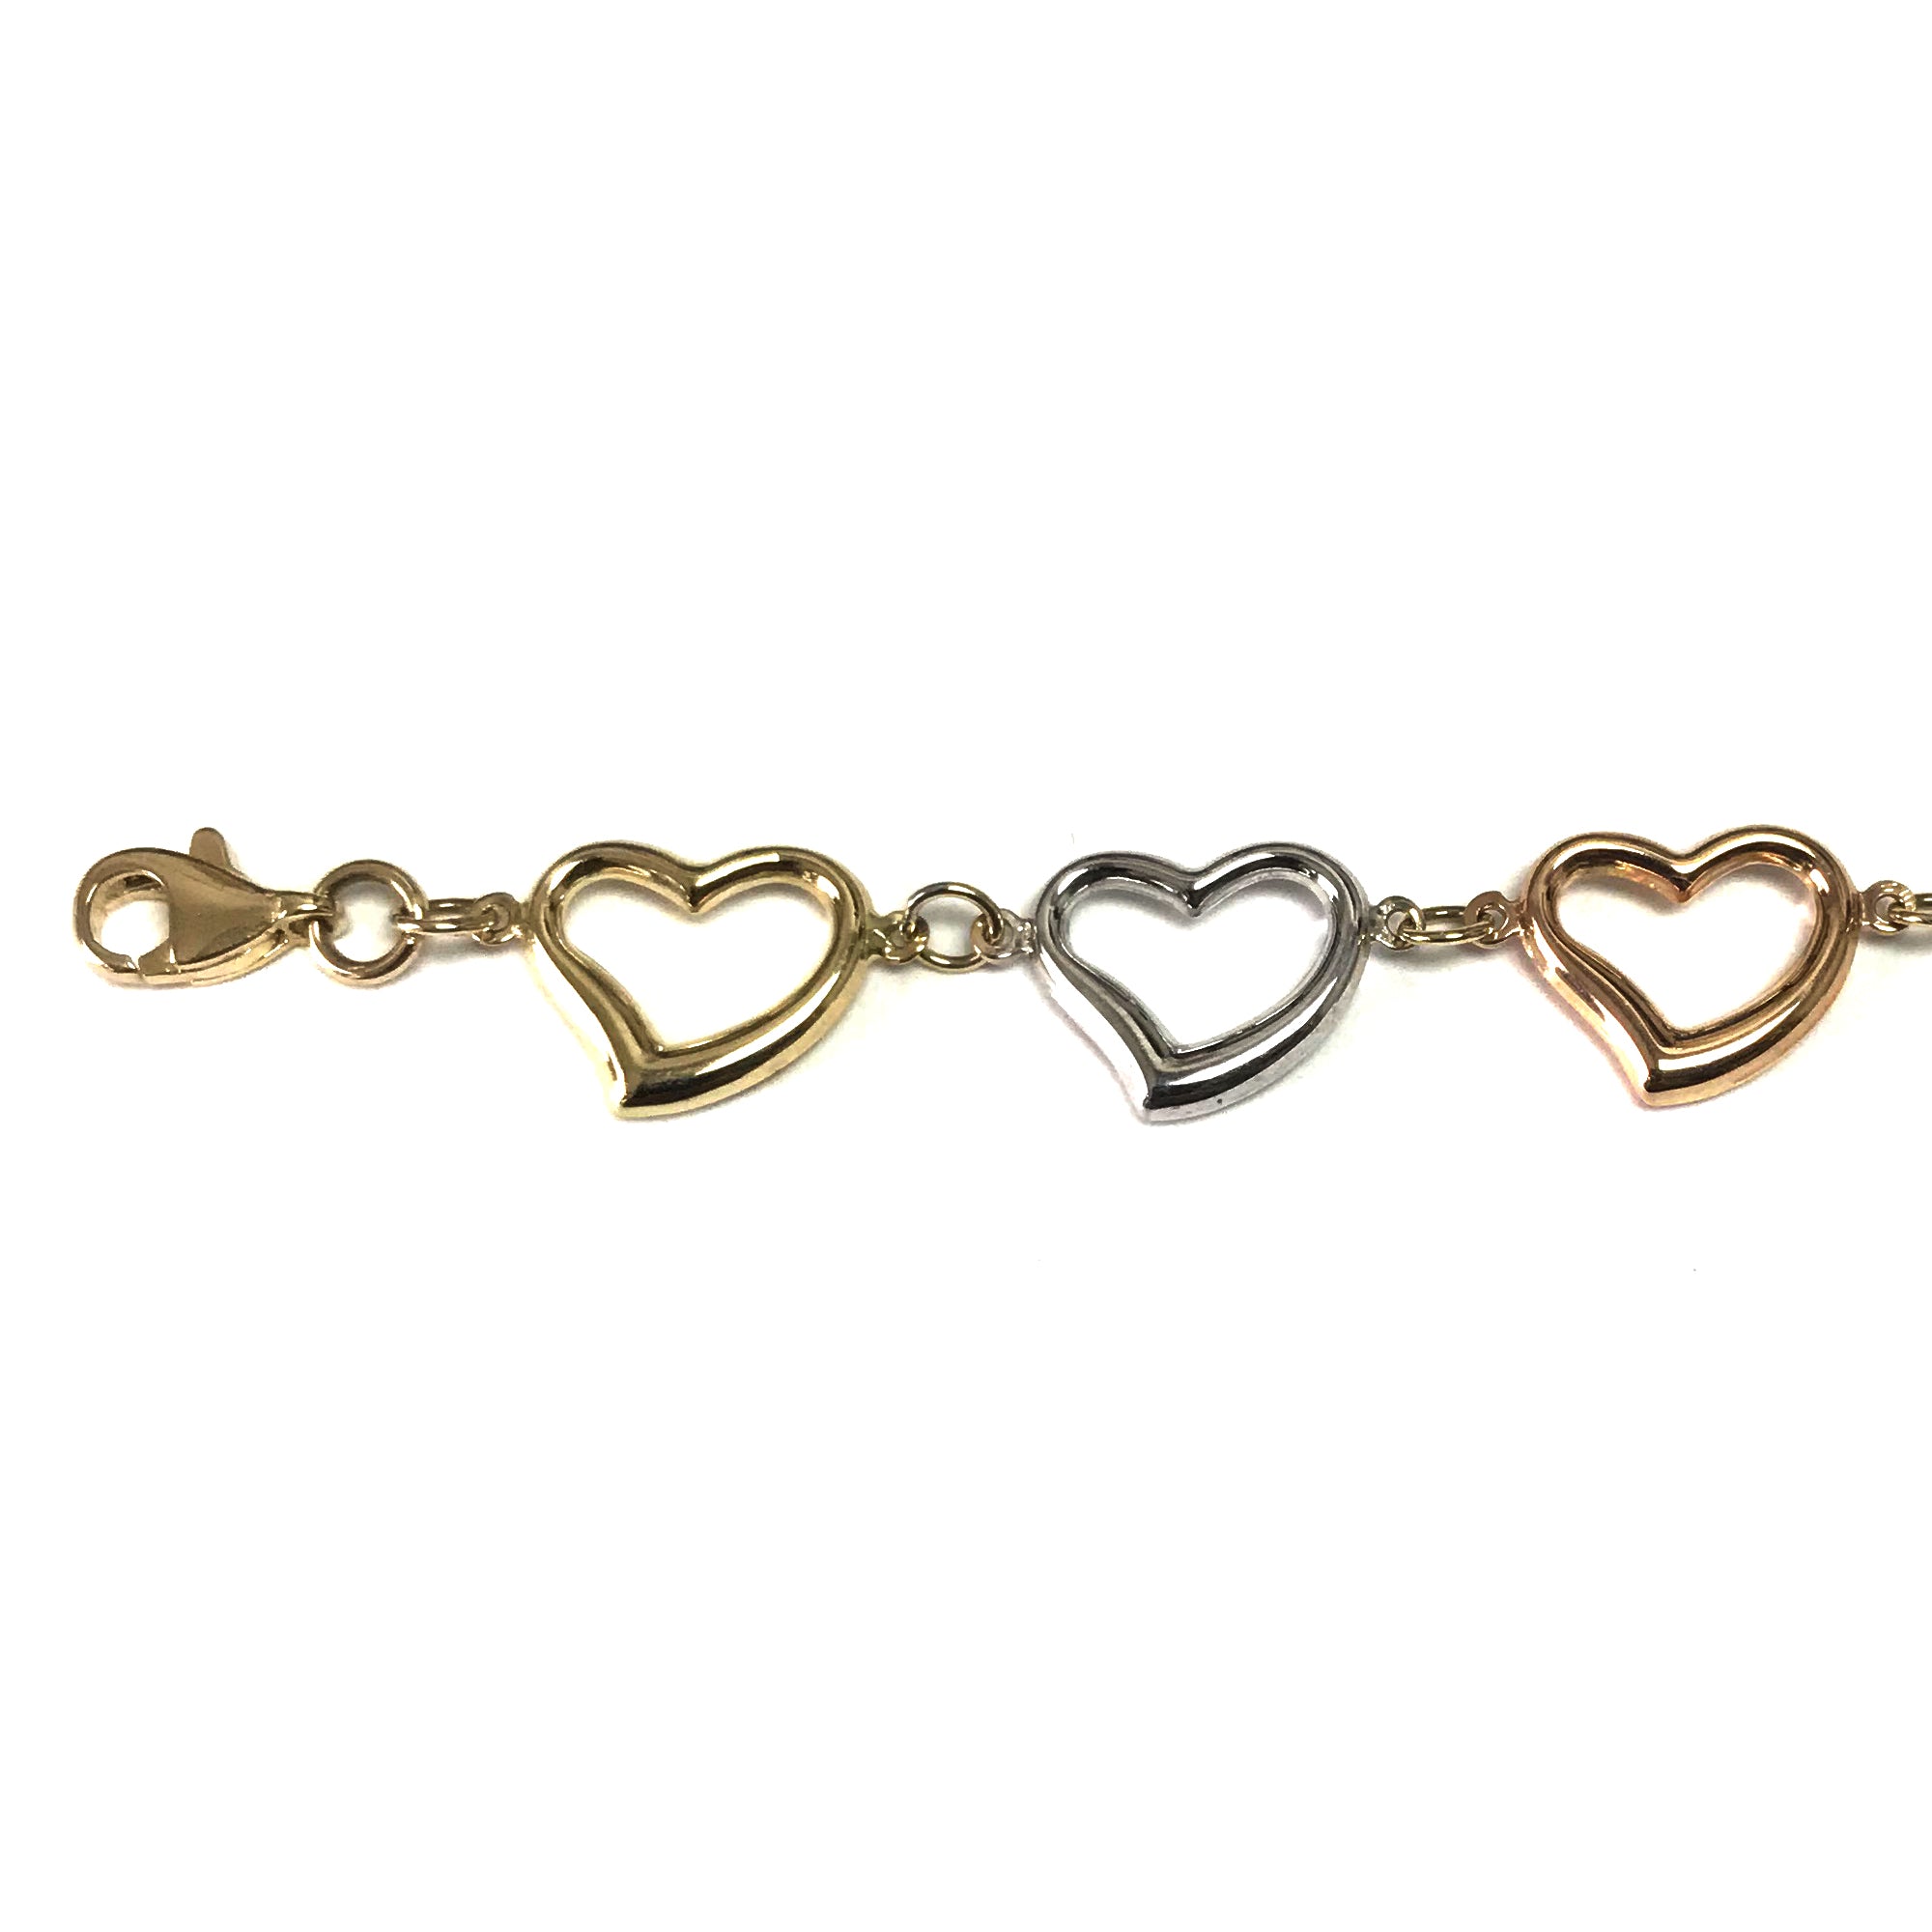 14k Yellow White And Rose Gold Heart Charms Bracelet, 7.5" fine designer jewelry for men and women